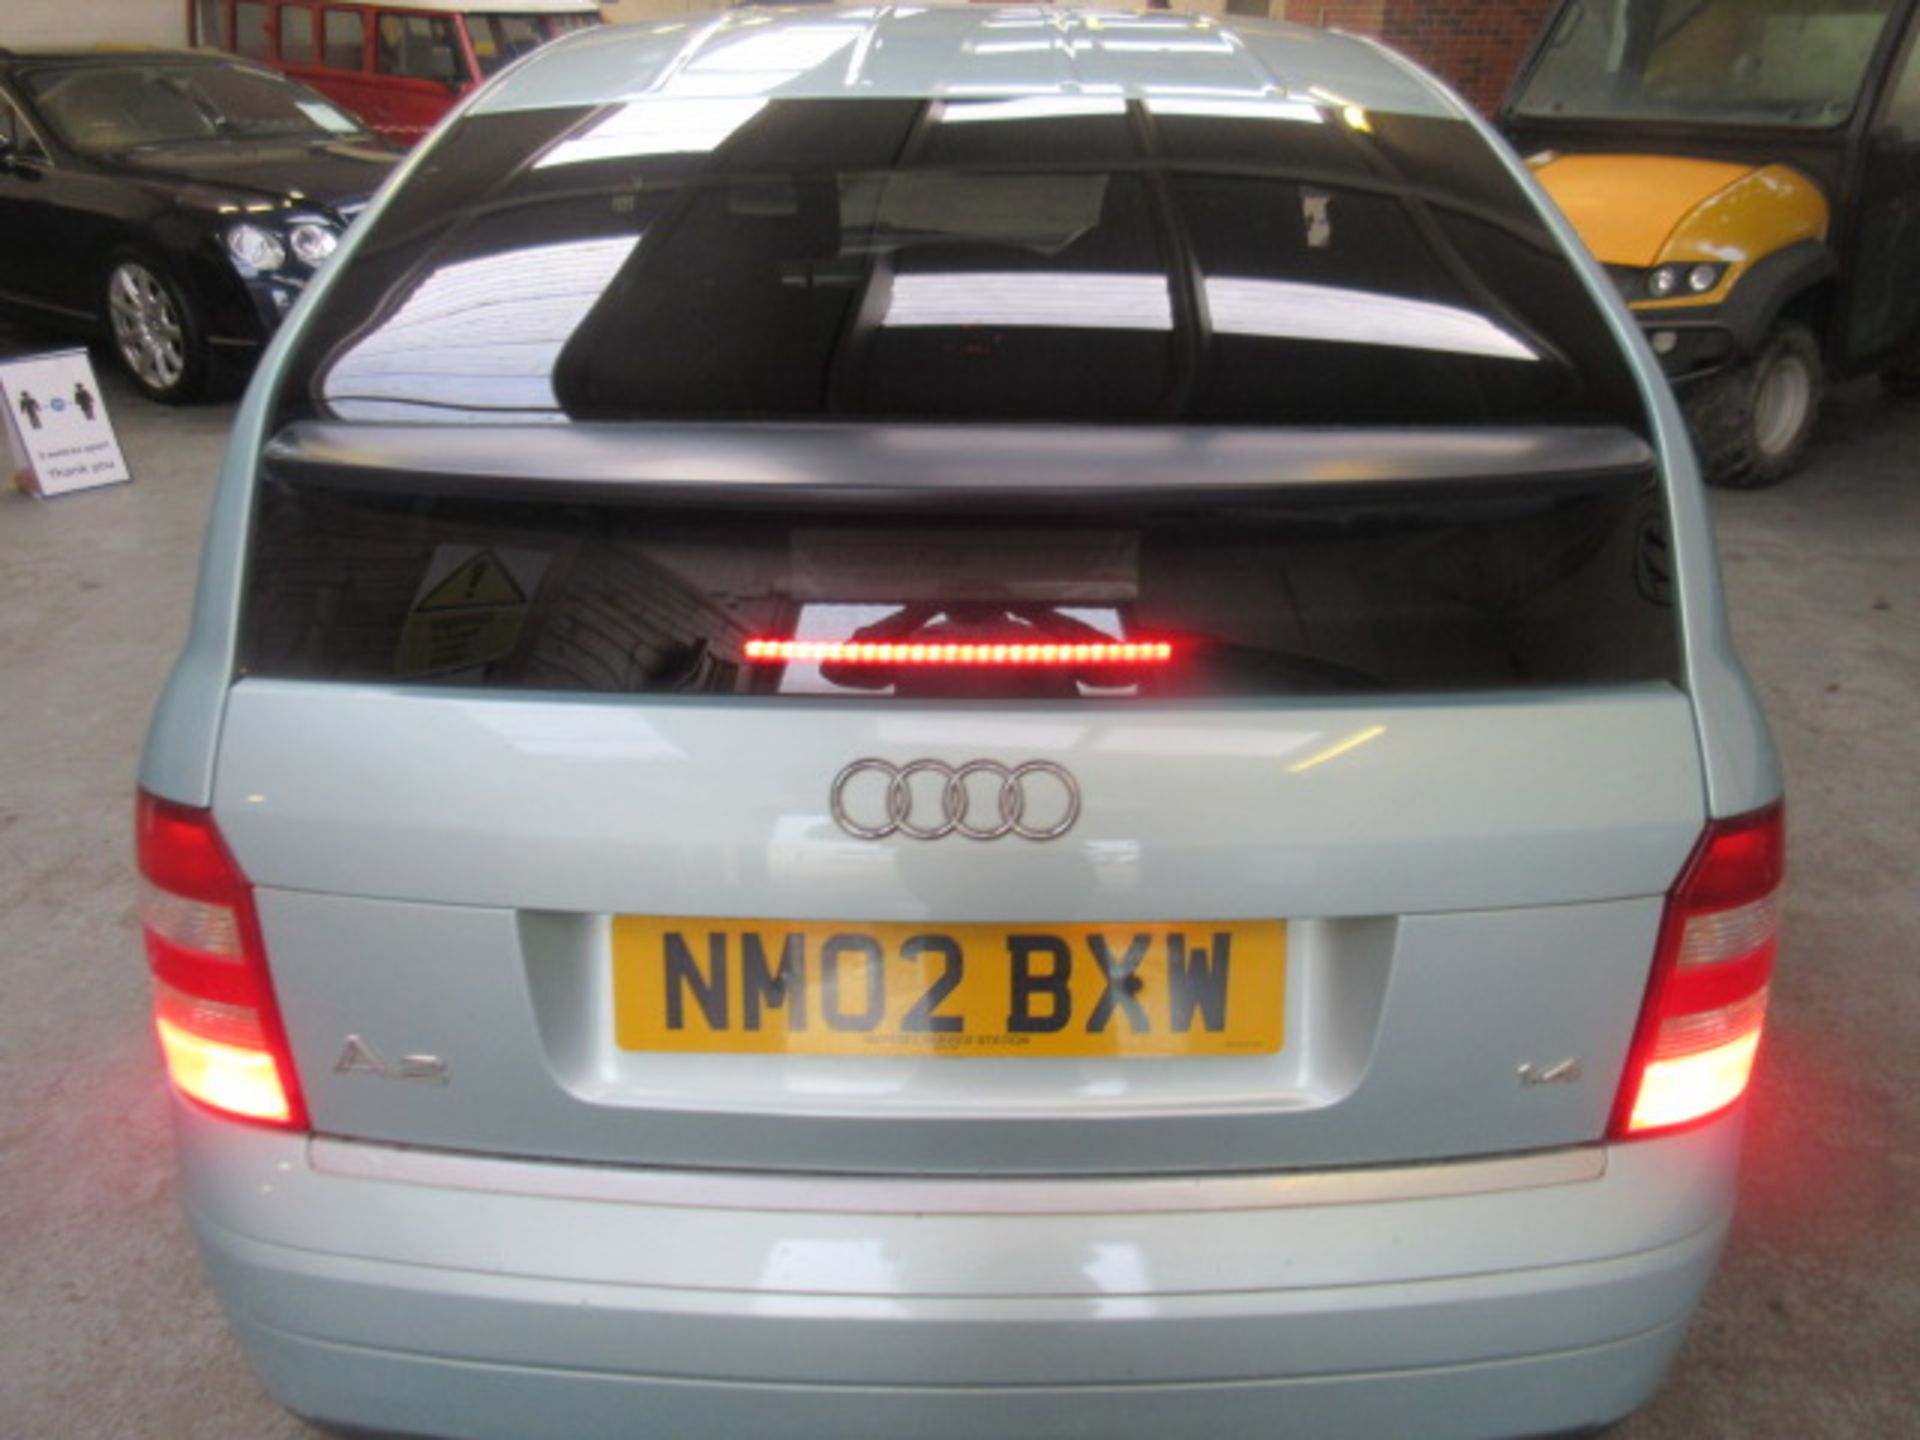 02 02 Audi A2 - Image 2 of 4